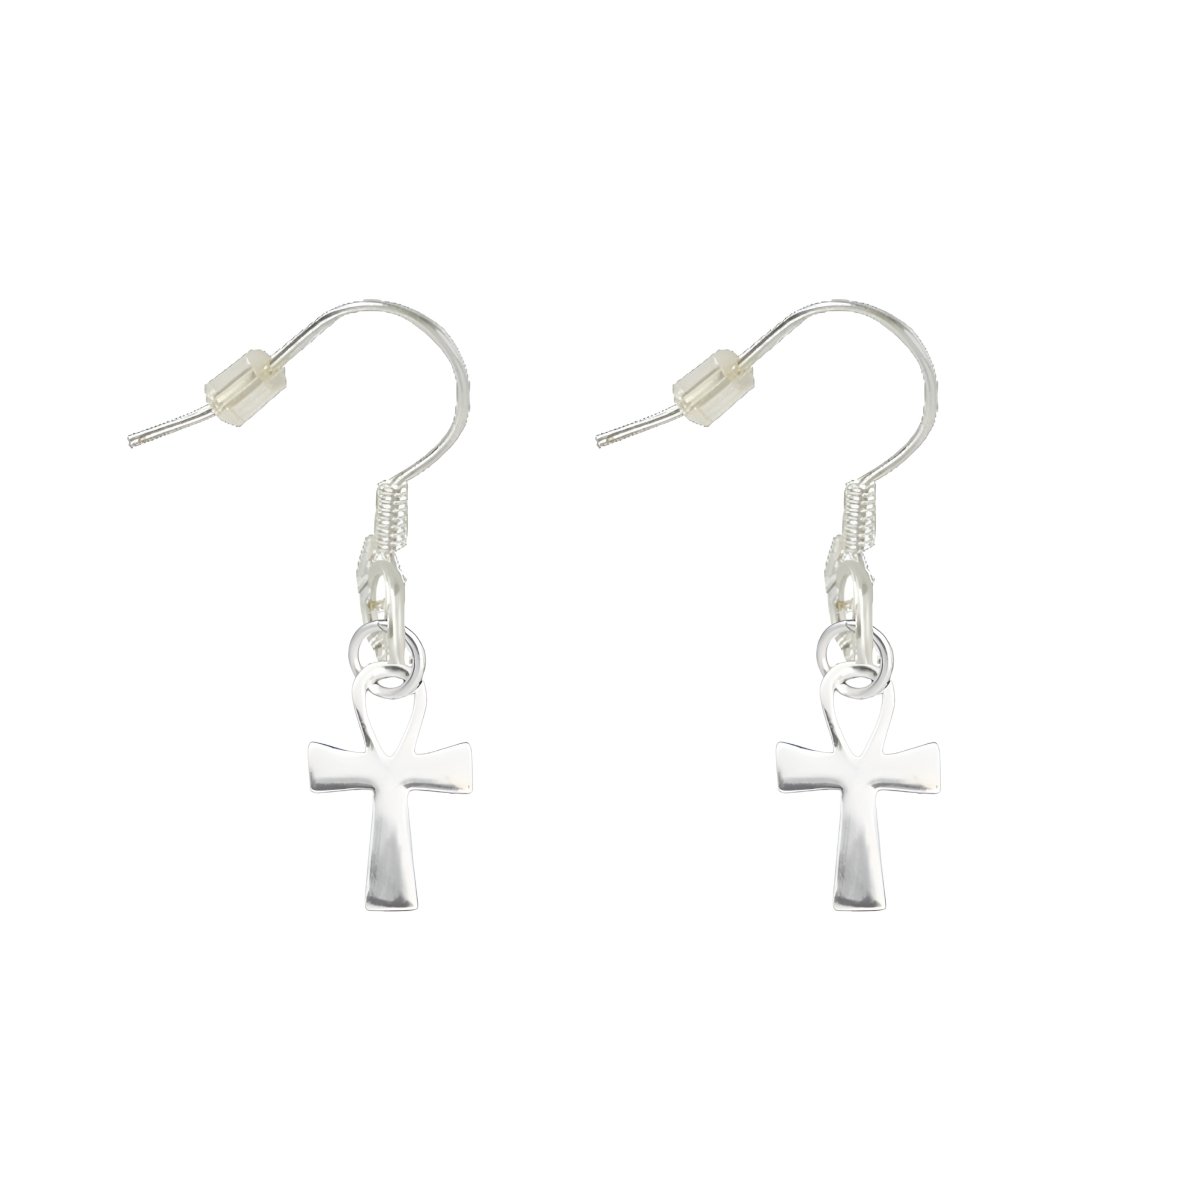 Decorative Silver Cross Earrings - Fundraising For A Cause